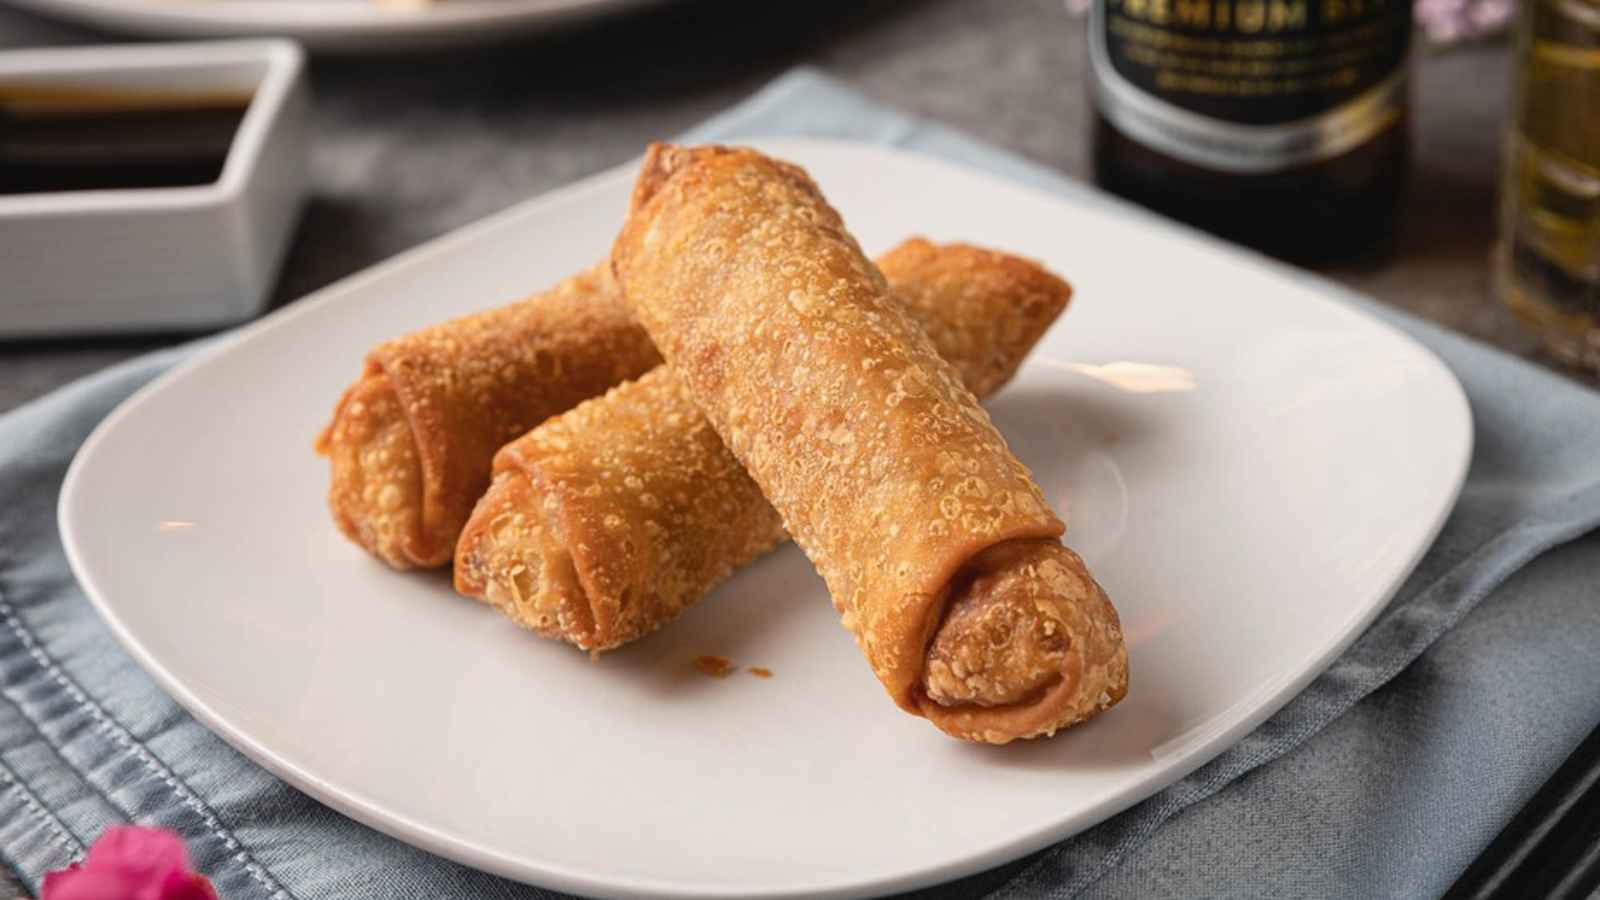 National Egg Roll Day 2023: Date, History, Facts about Egg